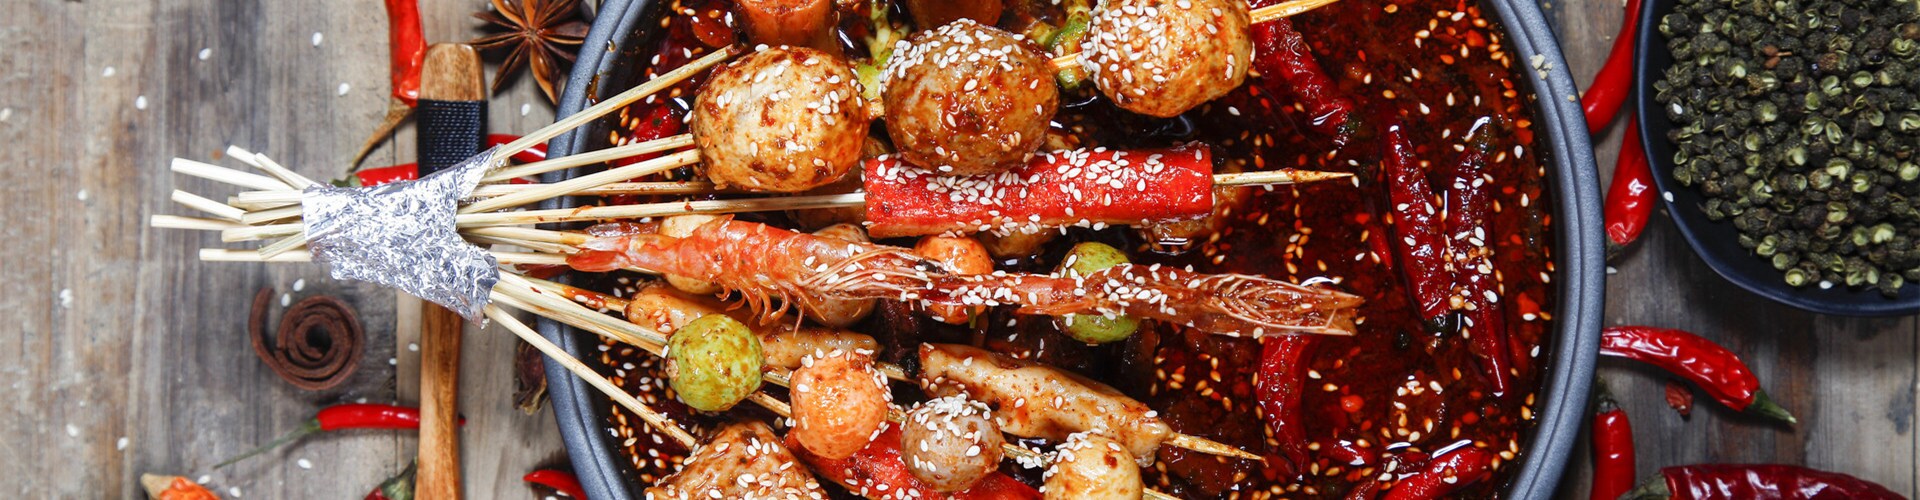 Chengdu Food - the Best Foods and Places to Eat in Sichuan’s Capital